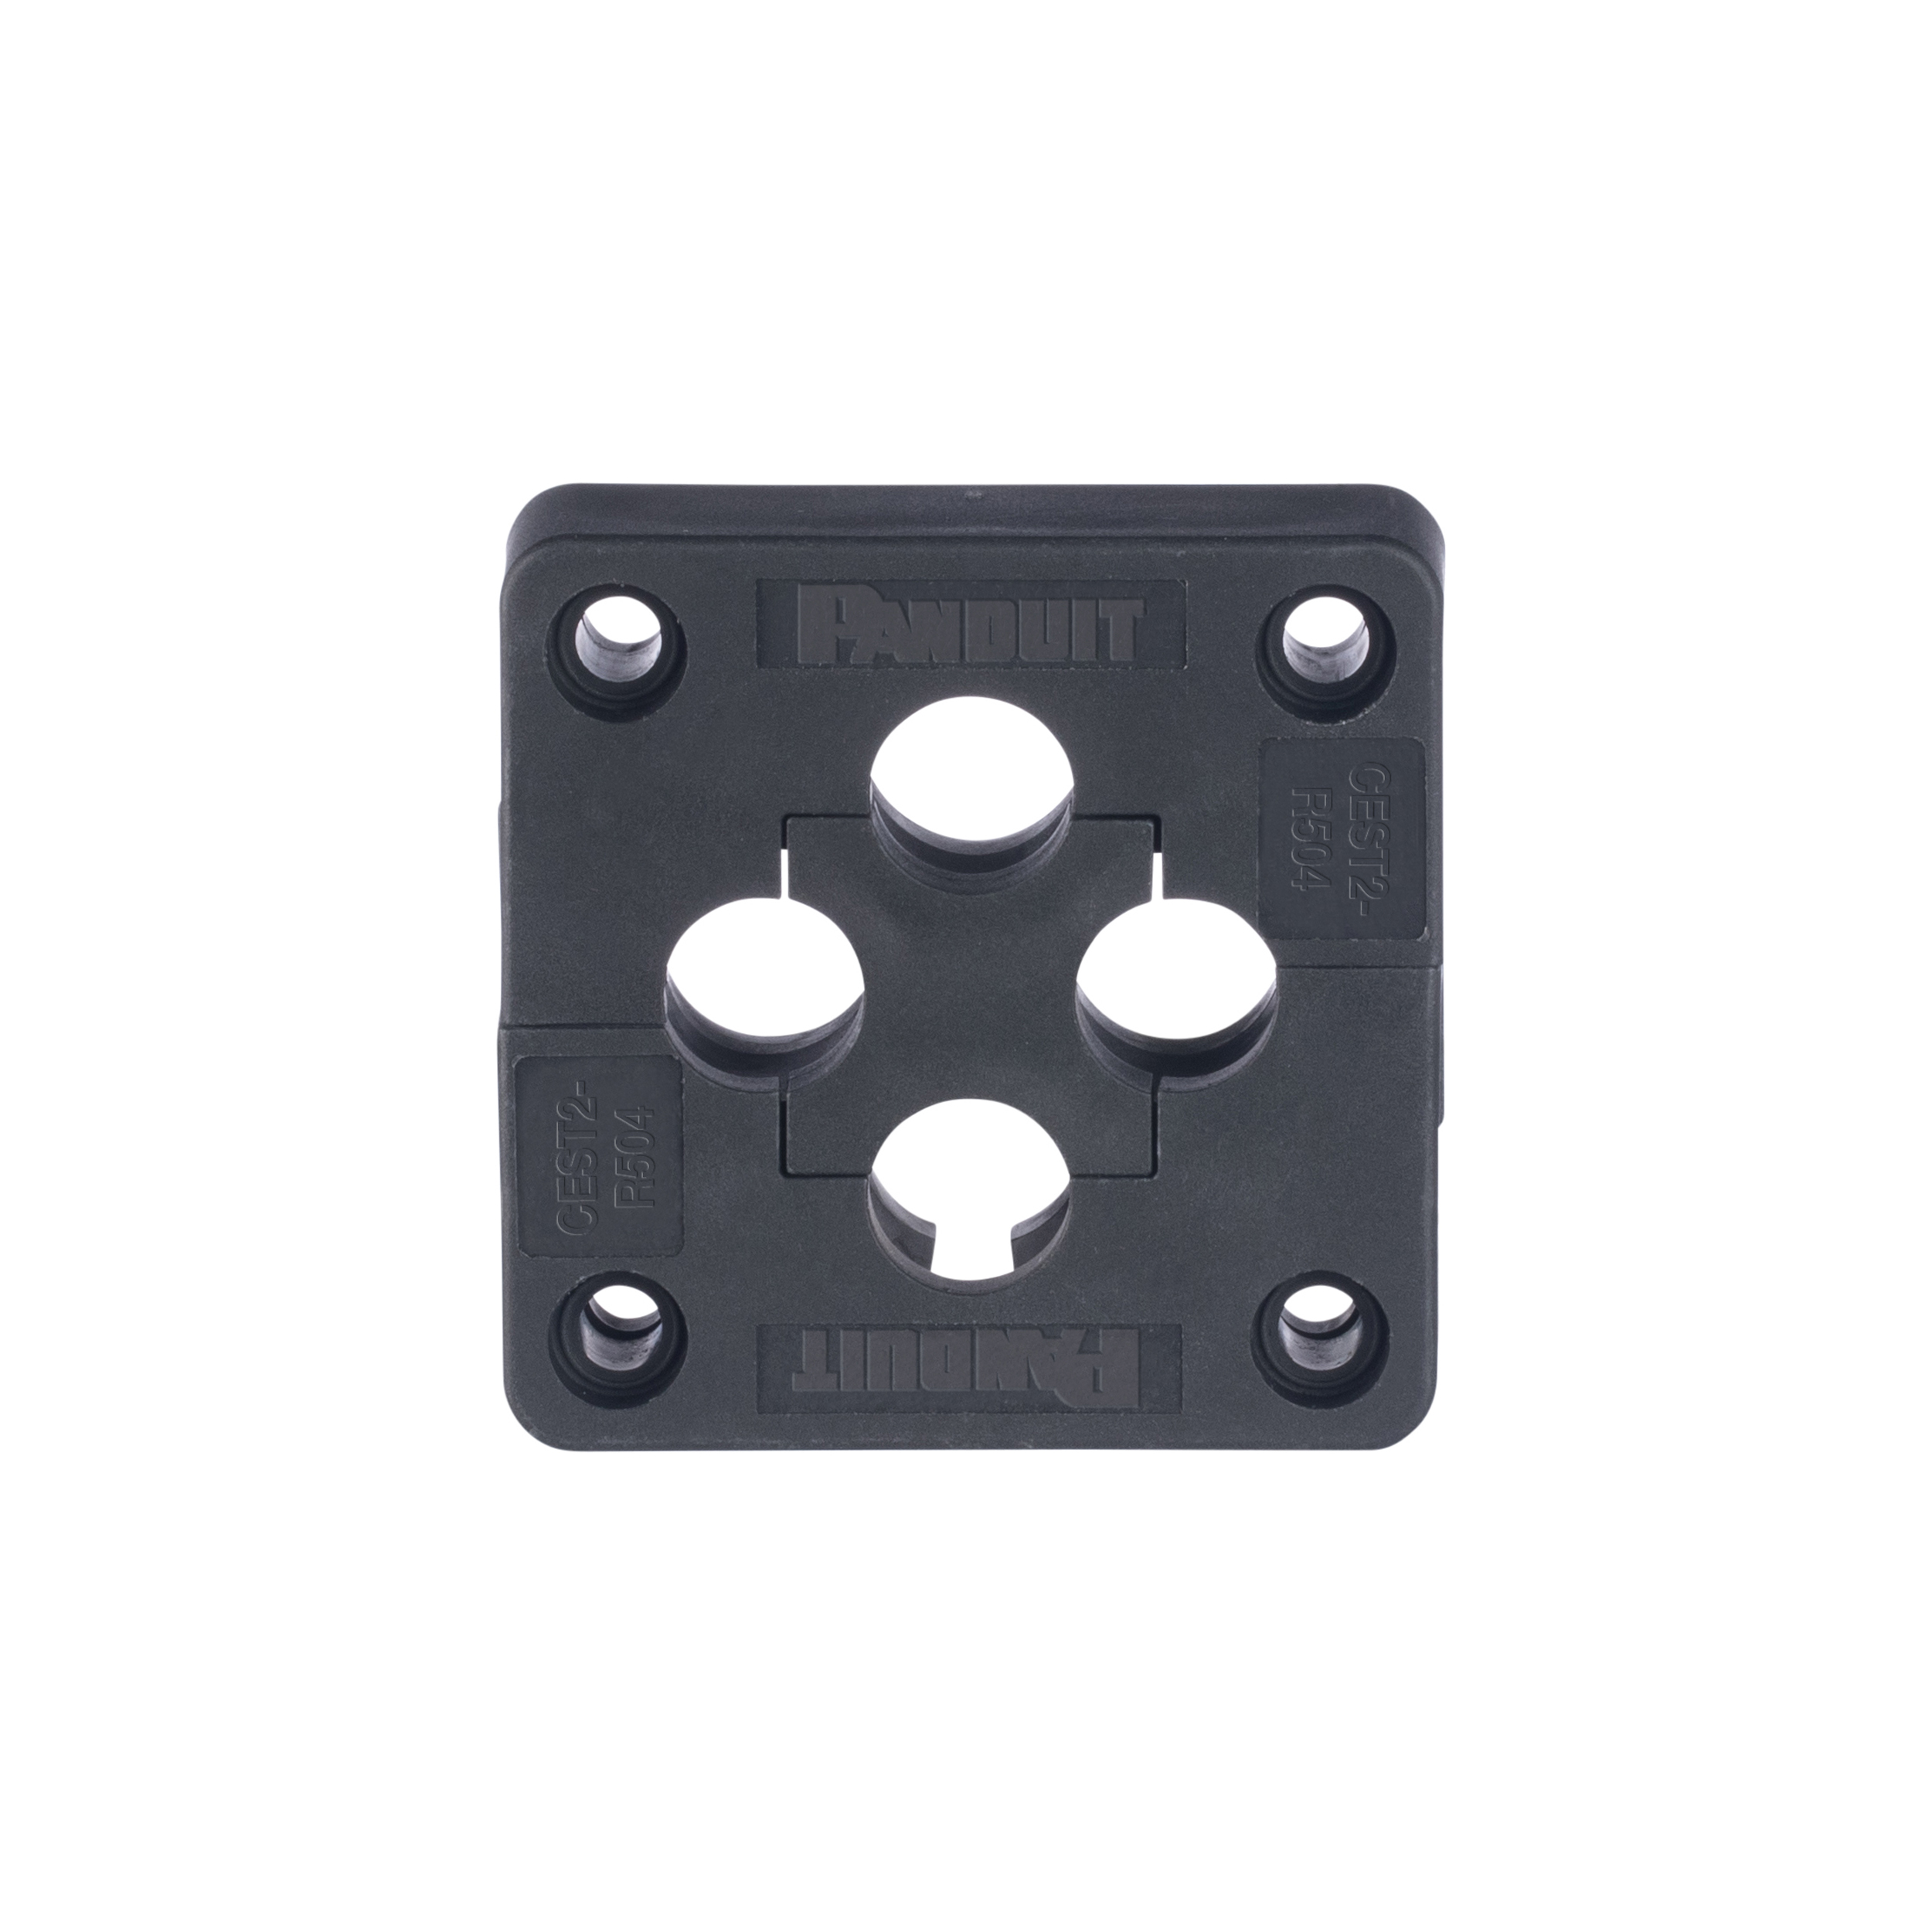 Cable Entry System, Terminated, IP65, Round 50.5mm, 4 holes, 1PC